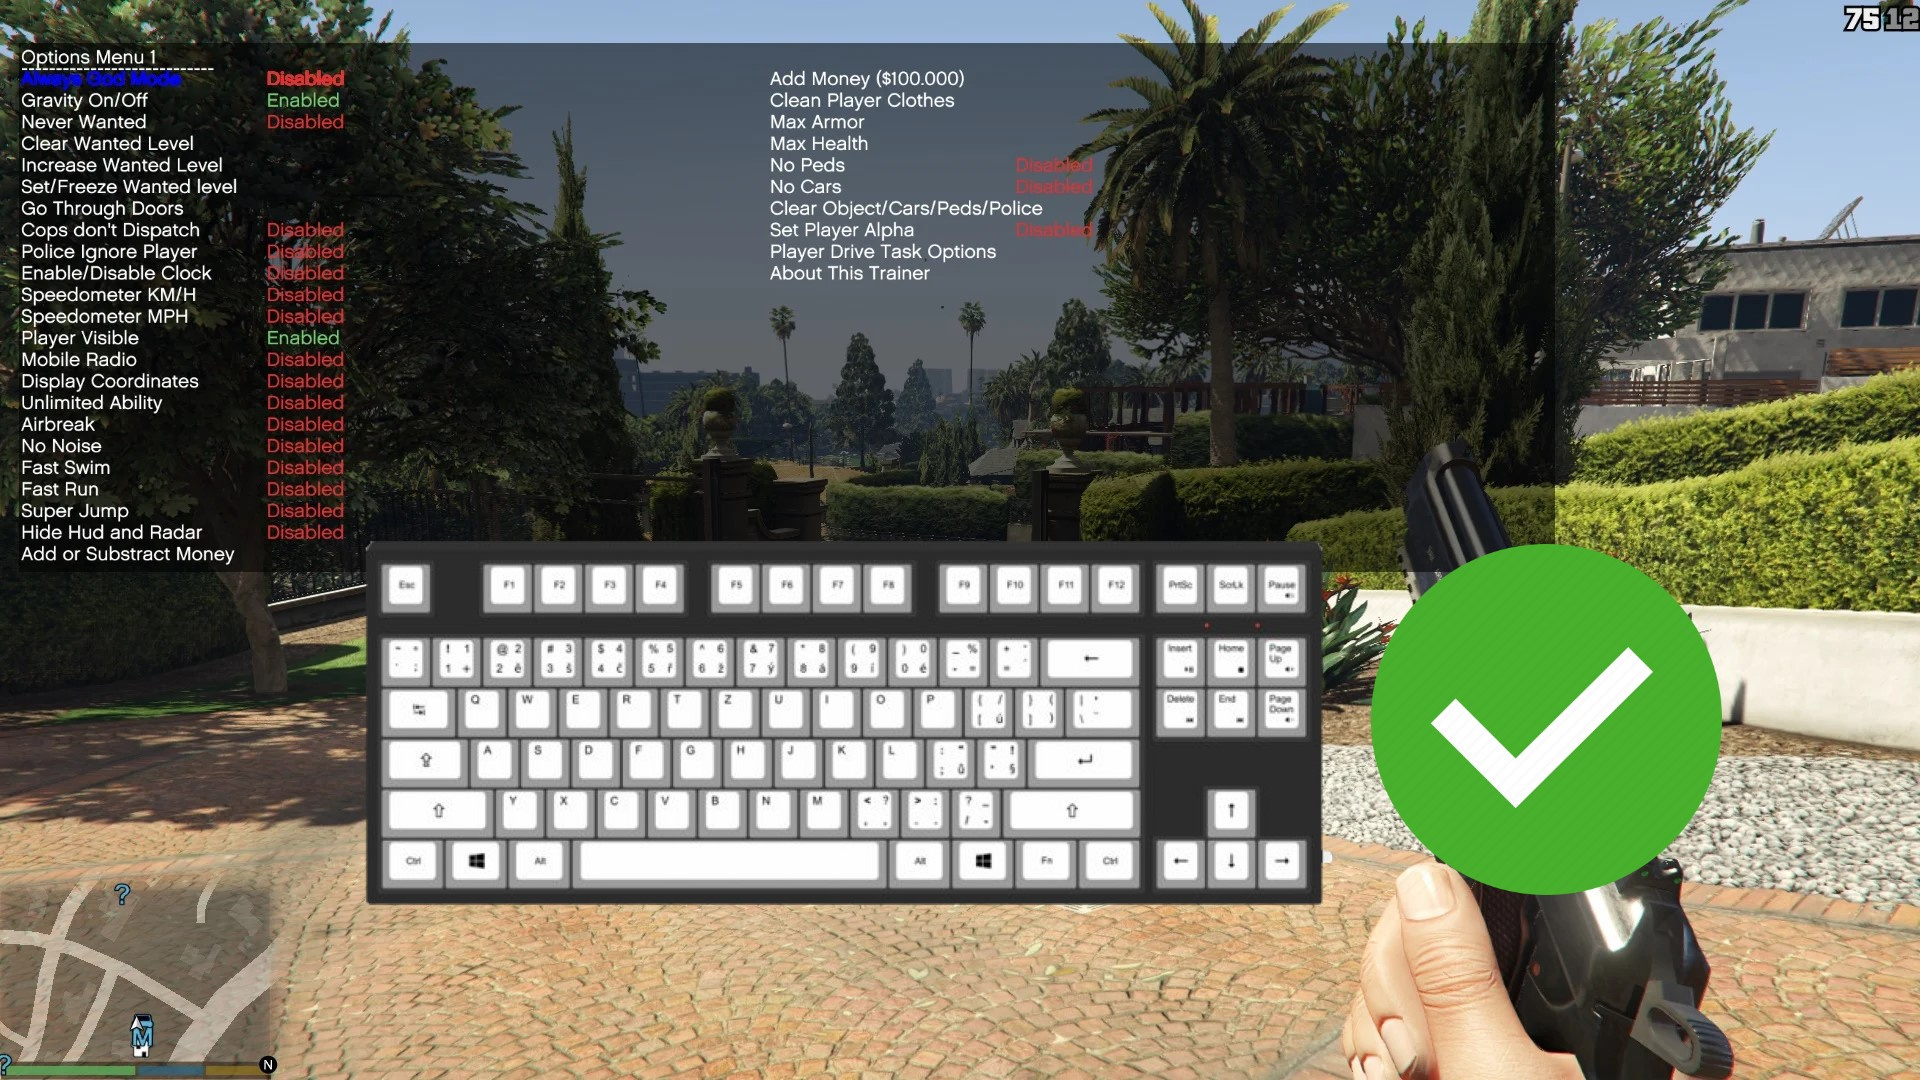 GTA 5 mods: How to install and use Script Hook V in 2023?